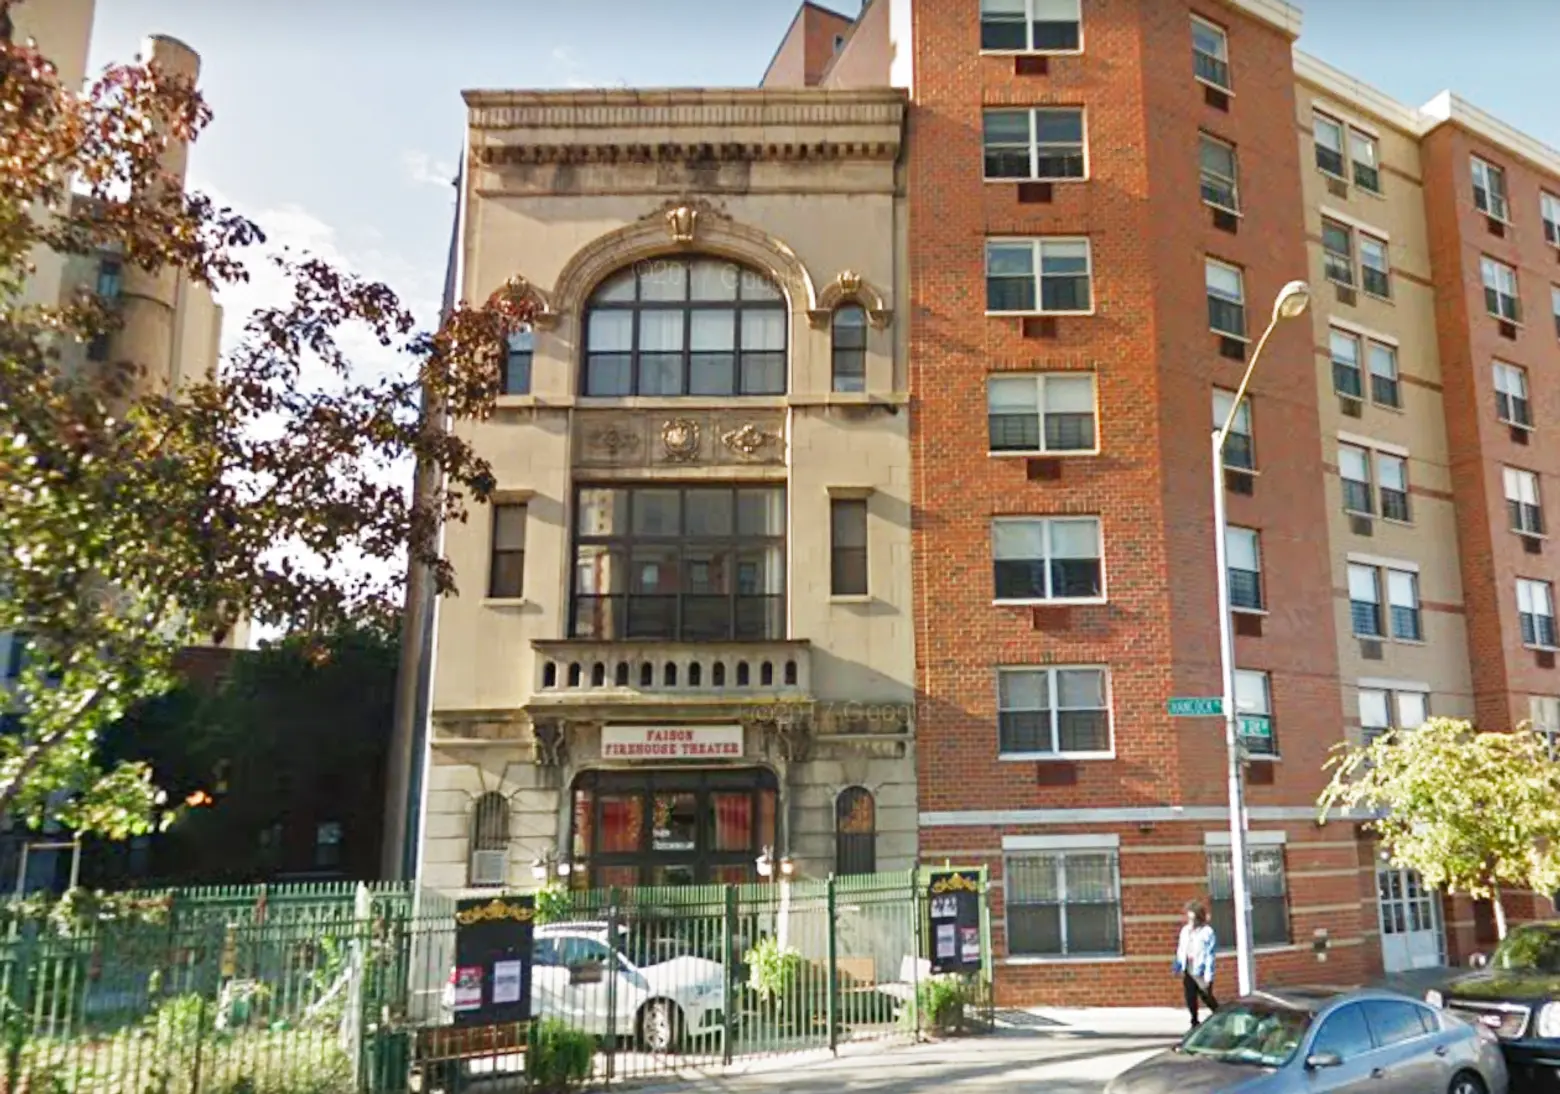 Historic West Harlem firehouse theater is for sale for $13M as part of development lot